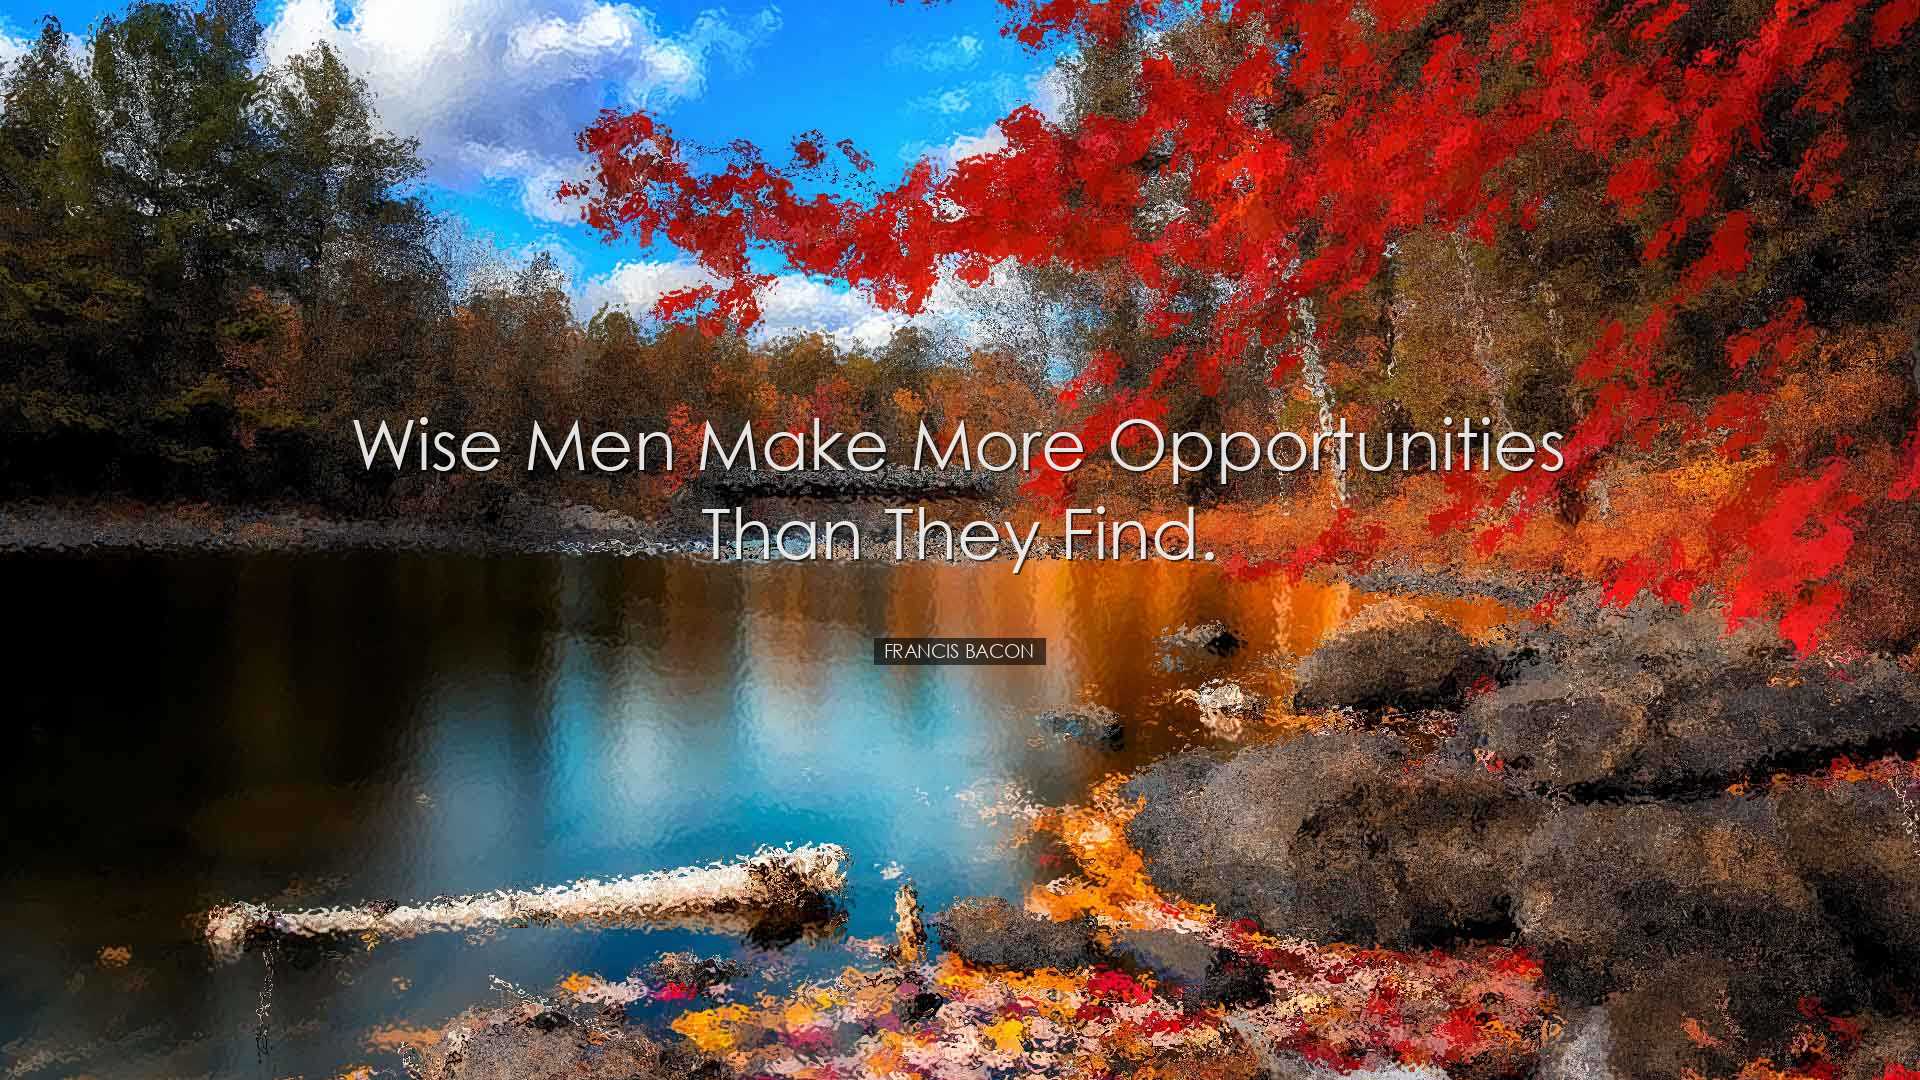 Wise men make more opportunities than they find. - Francis Bacon